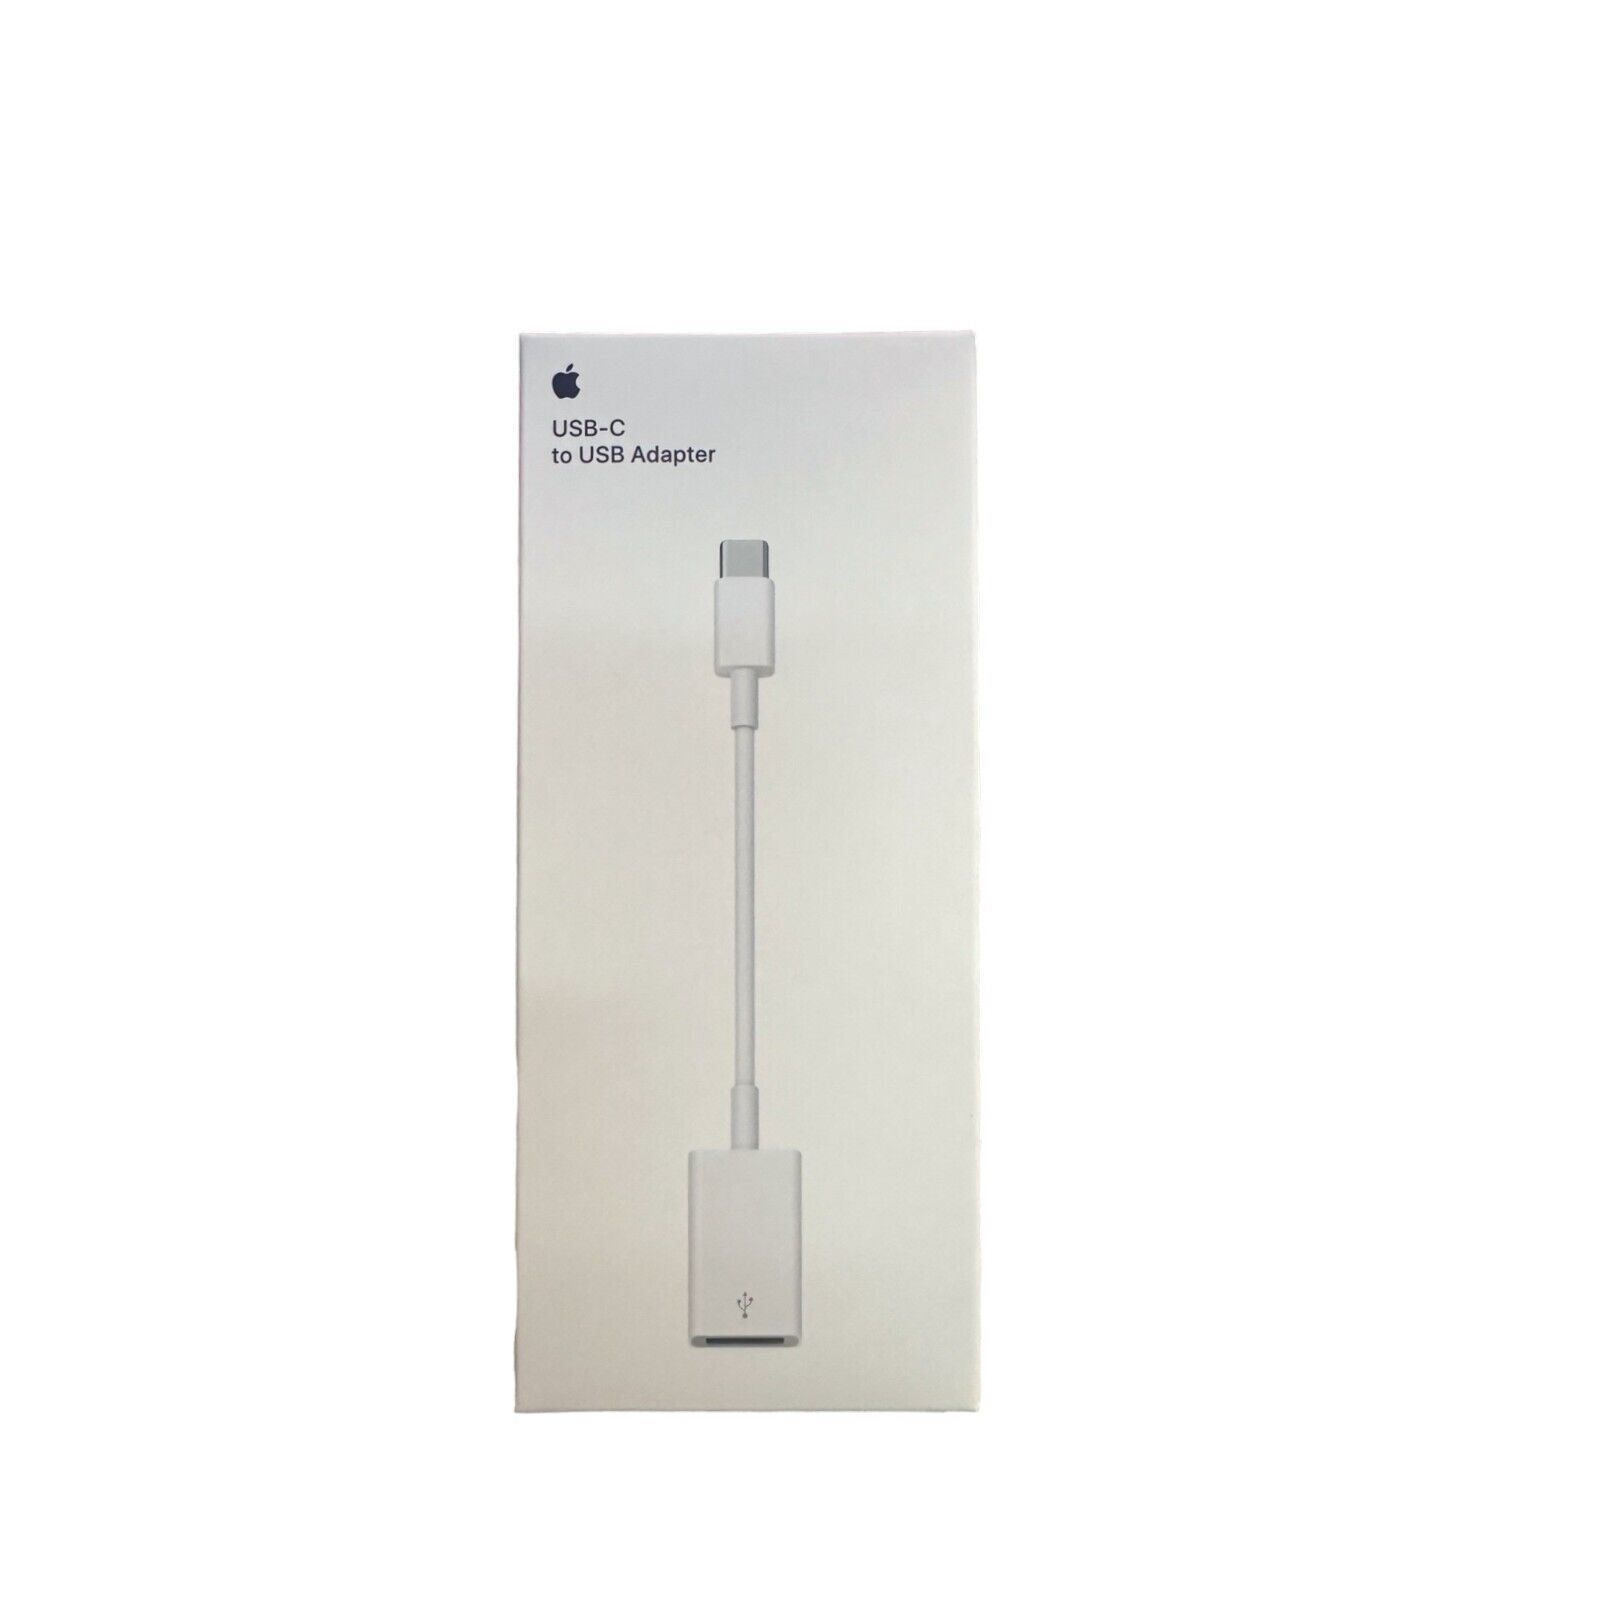 Apple USB-C to USB Adapter for Mac A1632 - Genuine (MJ1M2AM/A)